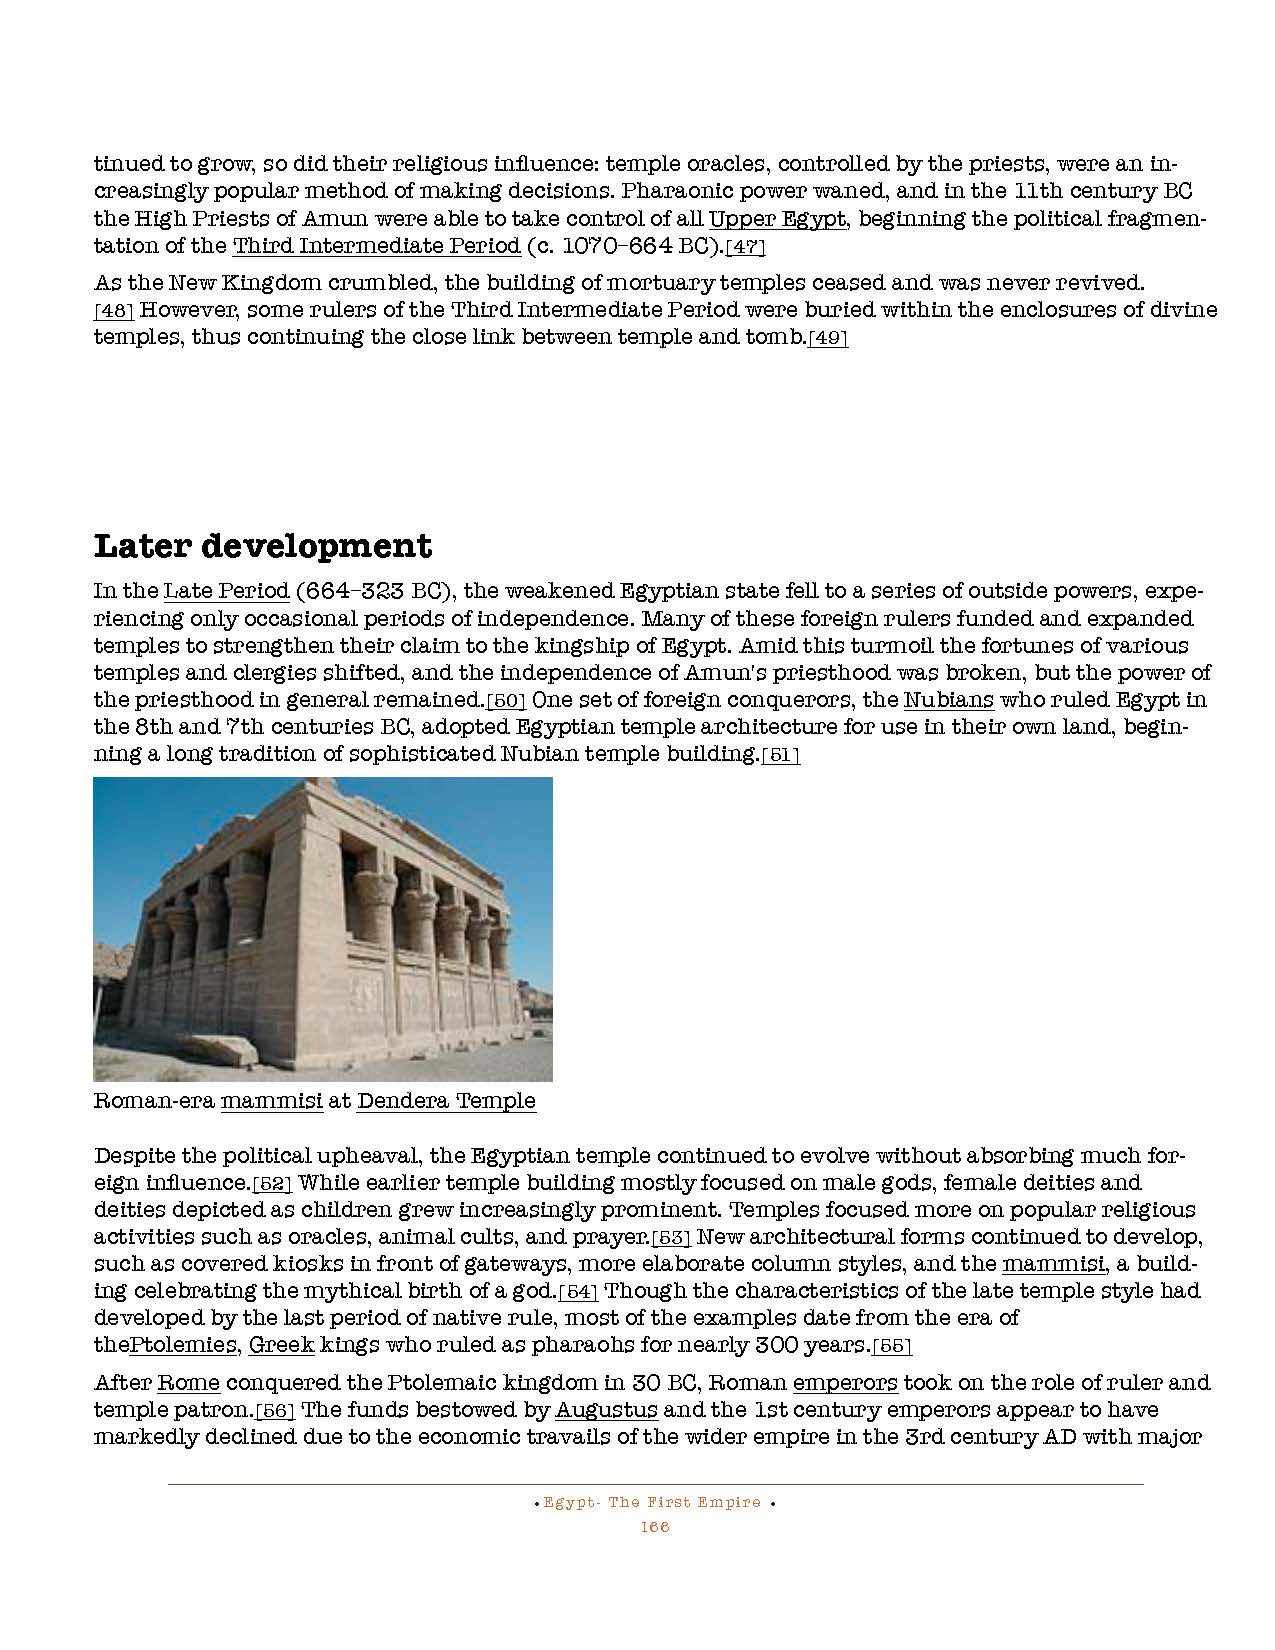 HOCE- Egypt  (First Empire) Notes_Page_166.jpg